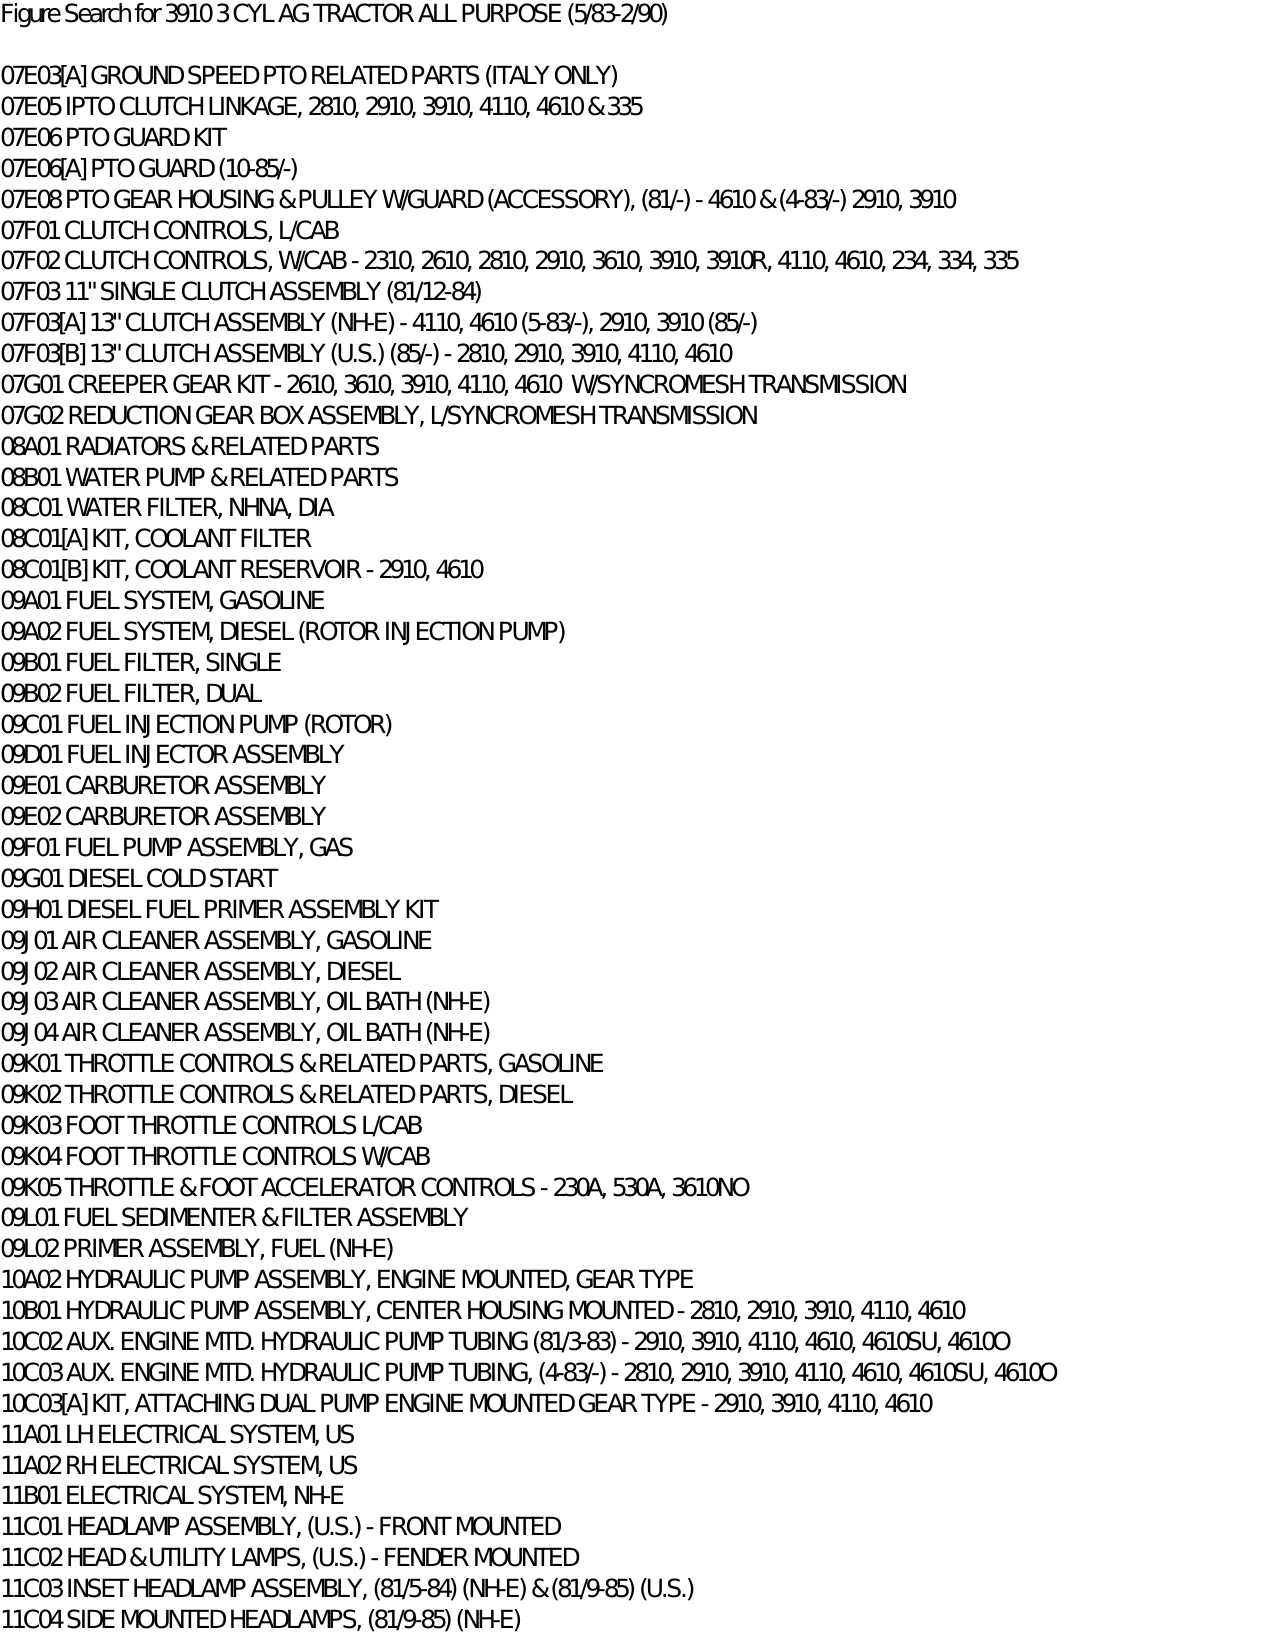 Ford 3910 tractor parts list Preview image 5